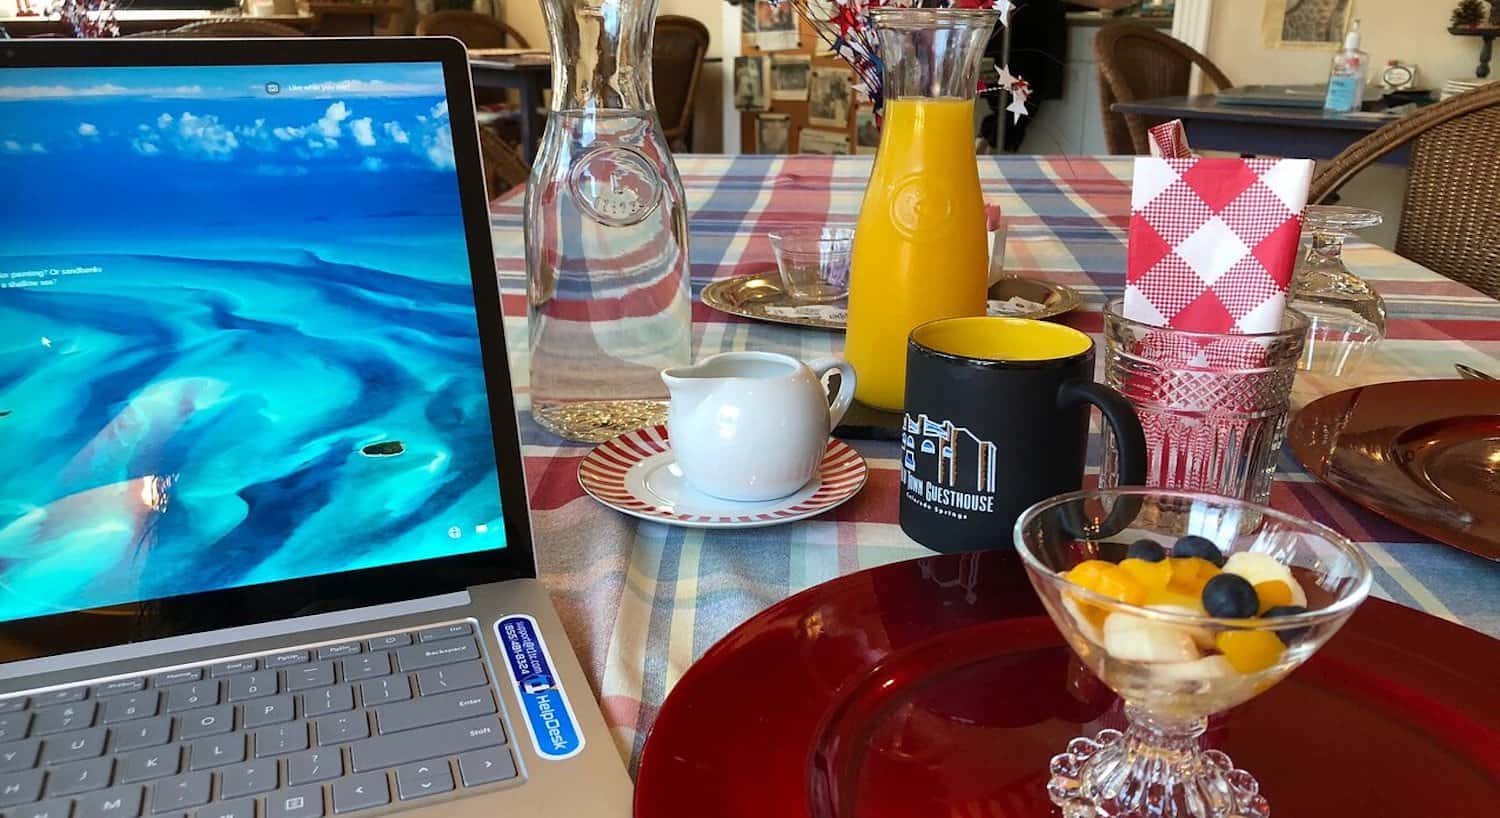 Close up view of a dining table with multicolored tablecloth, red plate with fruit cup, laptop, coffee cup, and carafes with water and orange juice